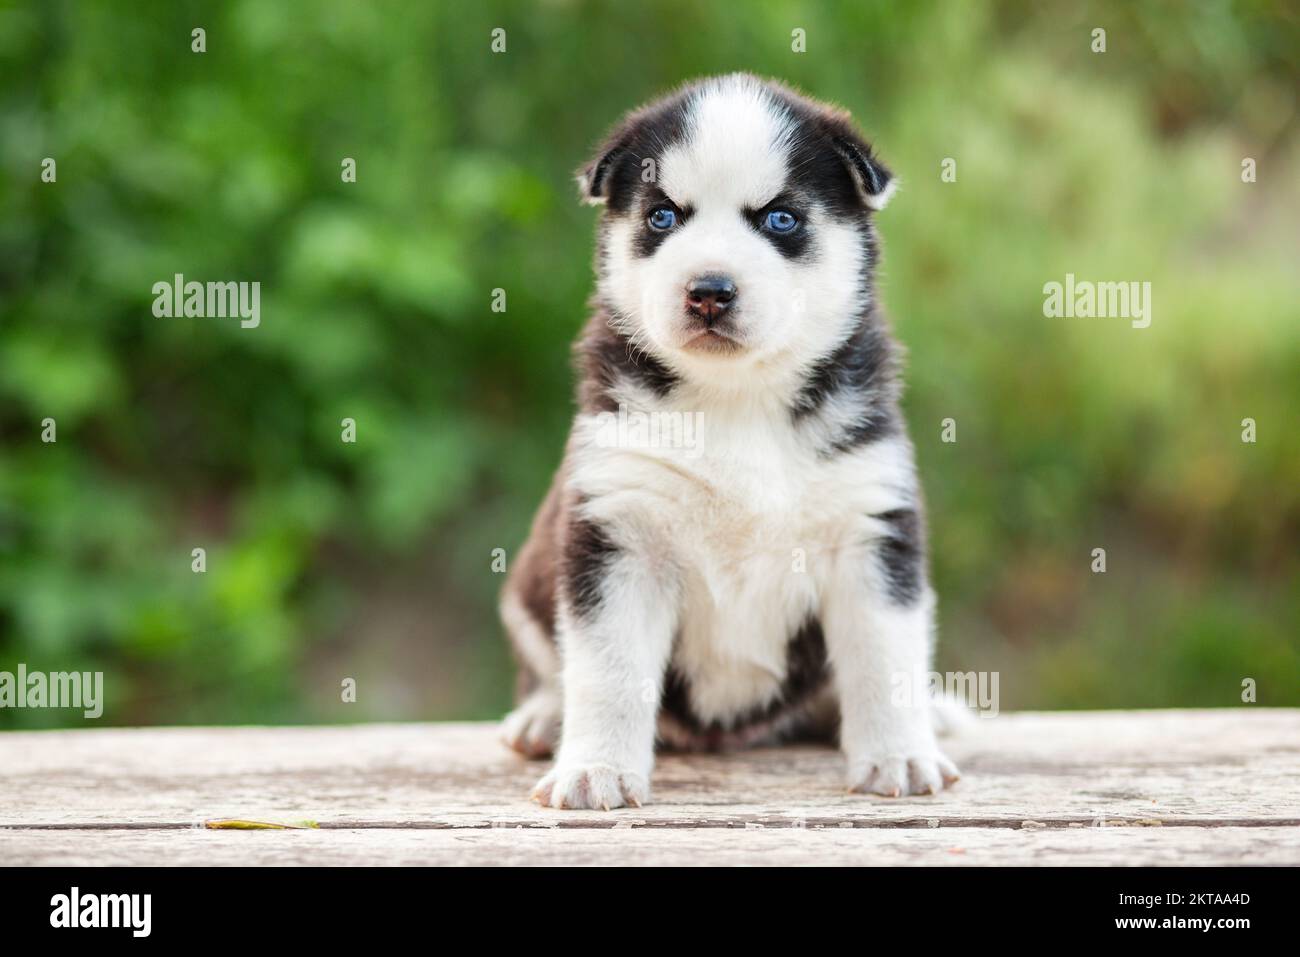 An adorable siberian husky puppy sitting on white wooden table Stock Photo